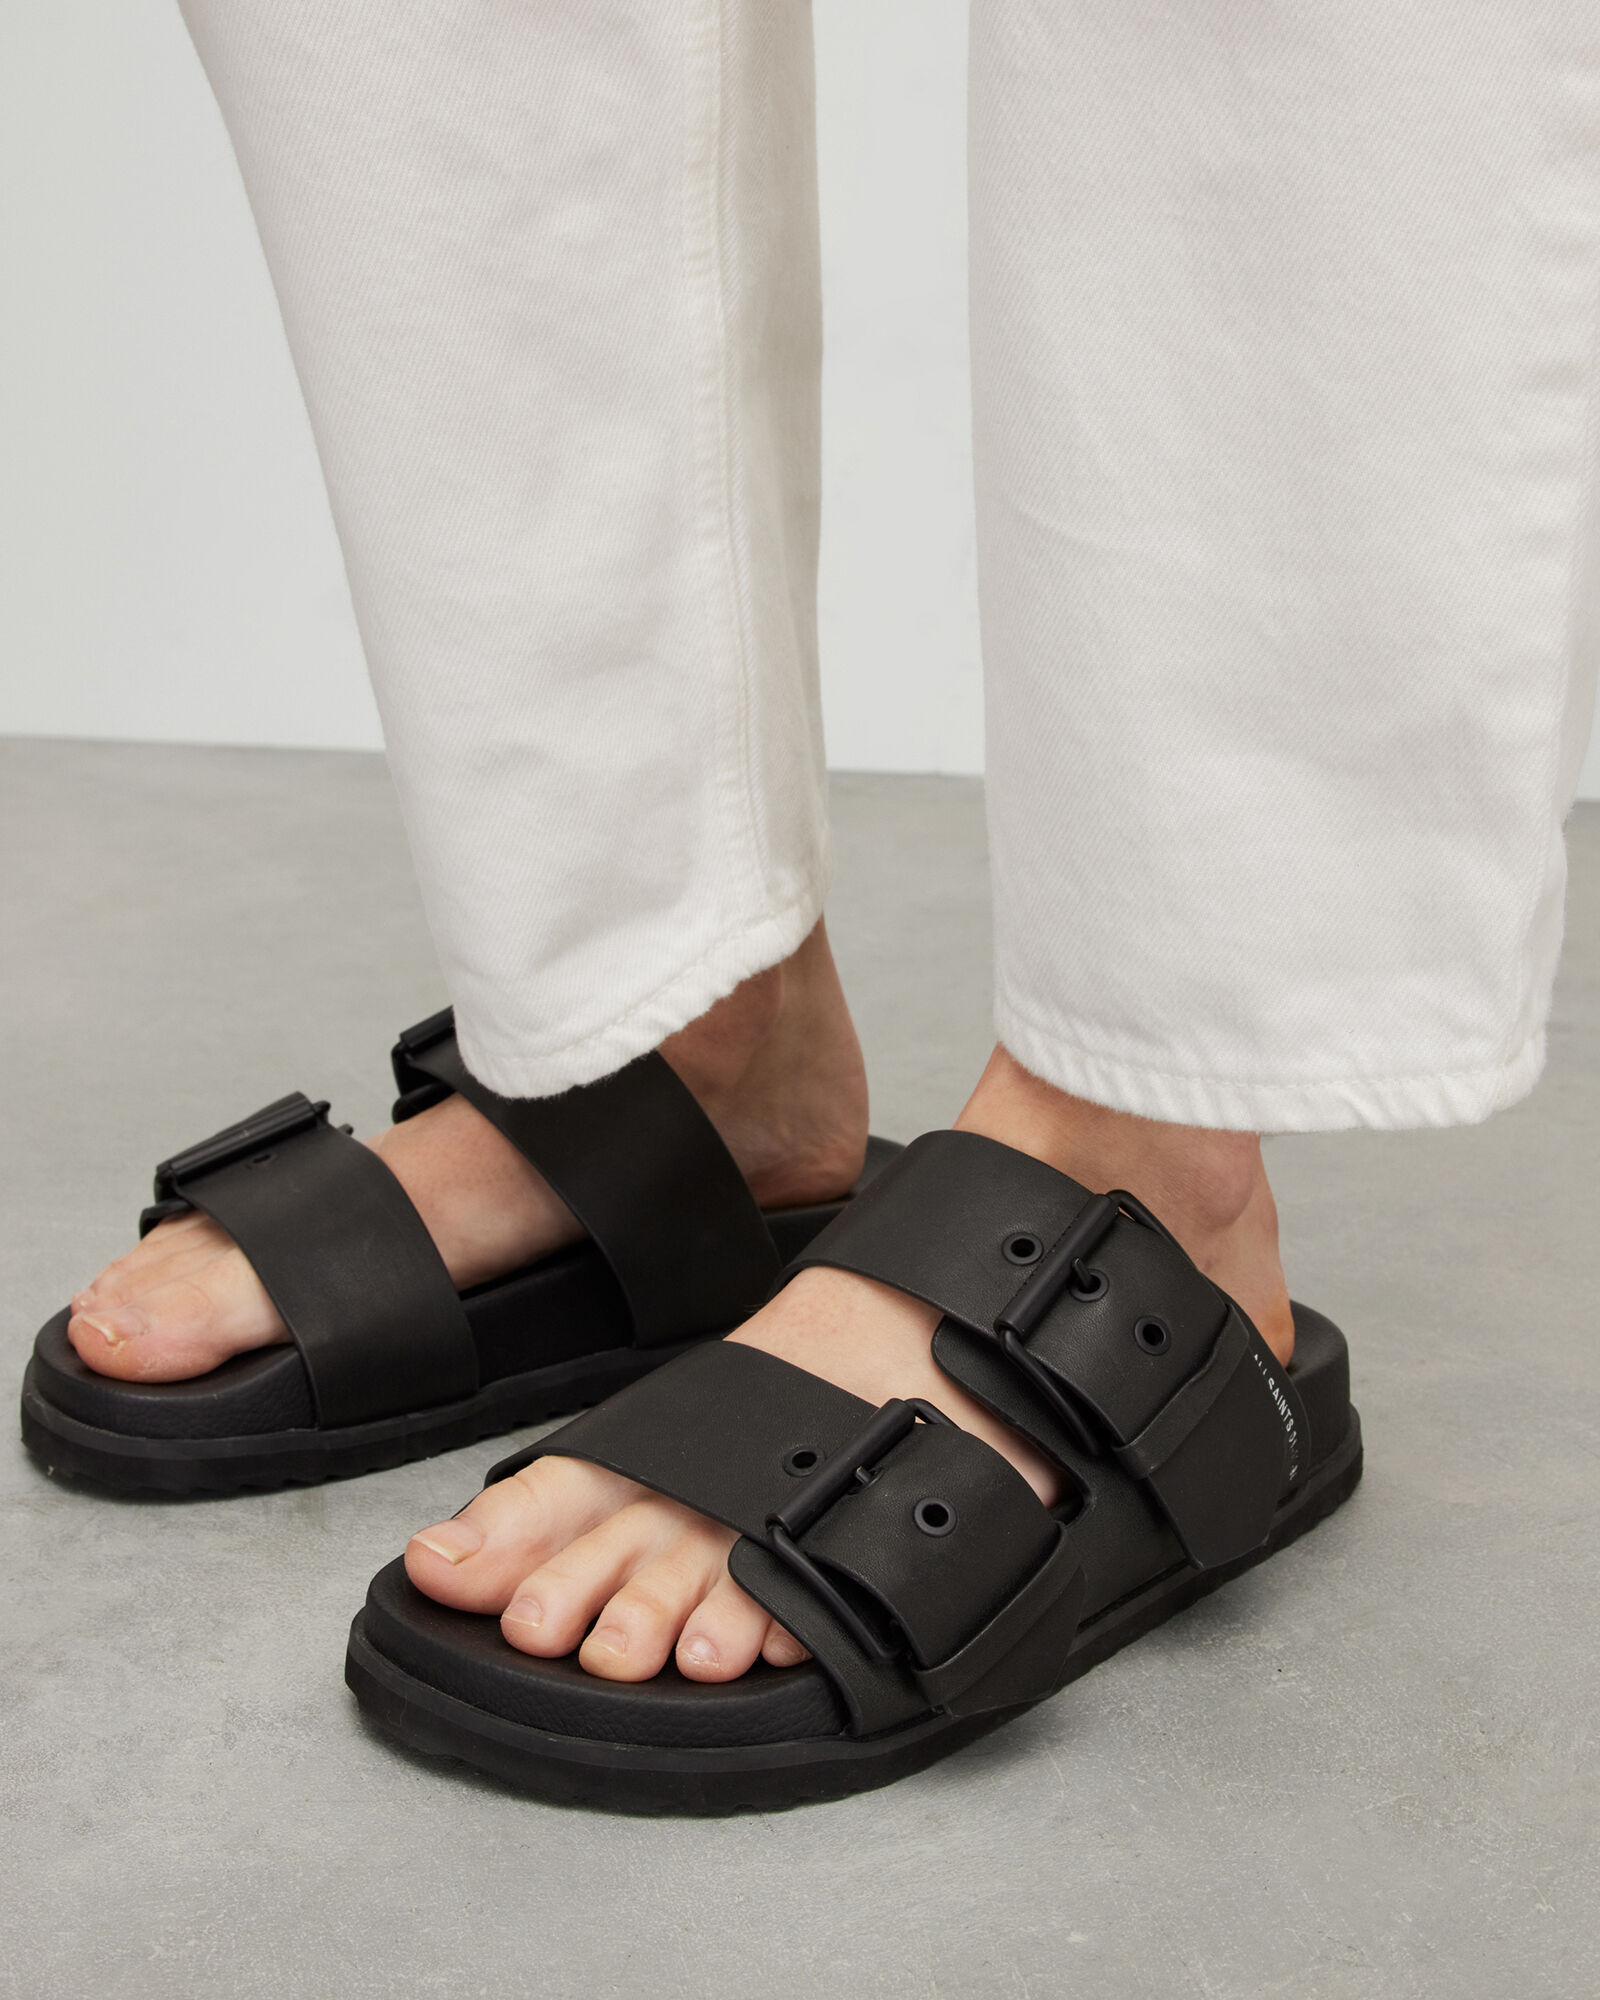 Black Leather Sandals For Men at best price in Noida | ID: 19082890112